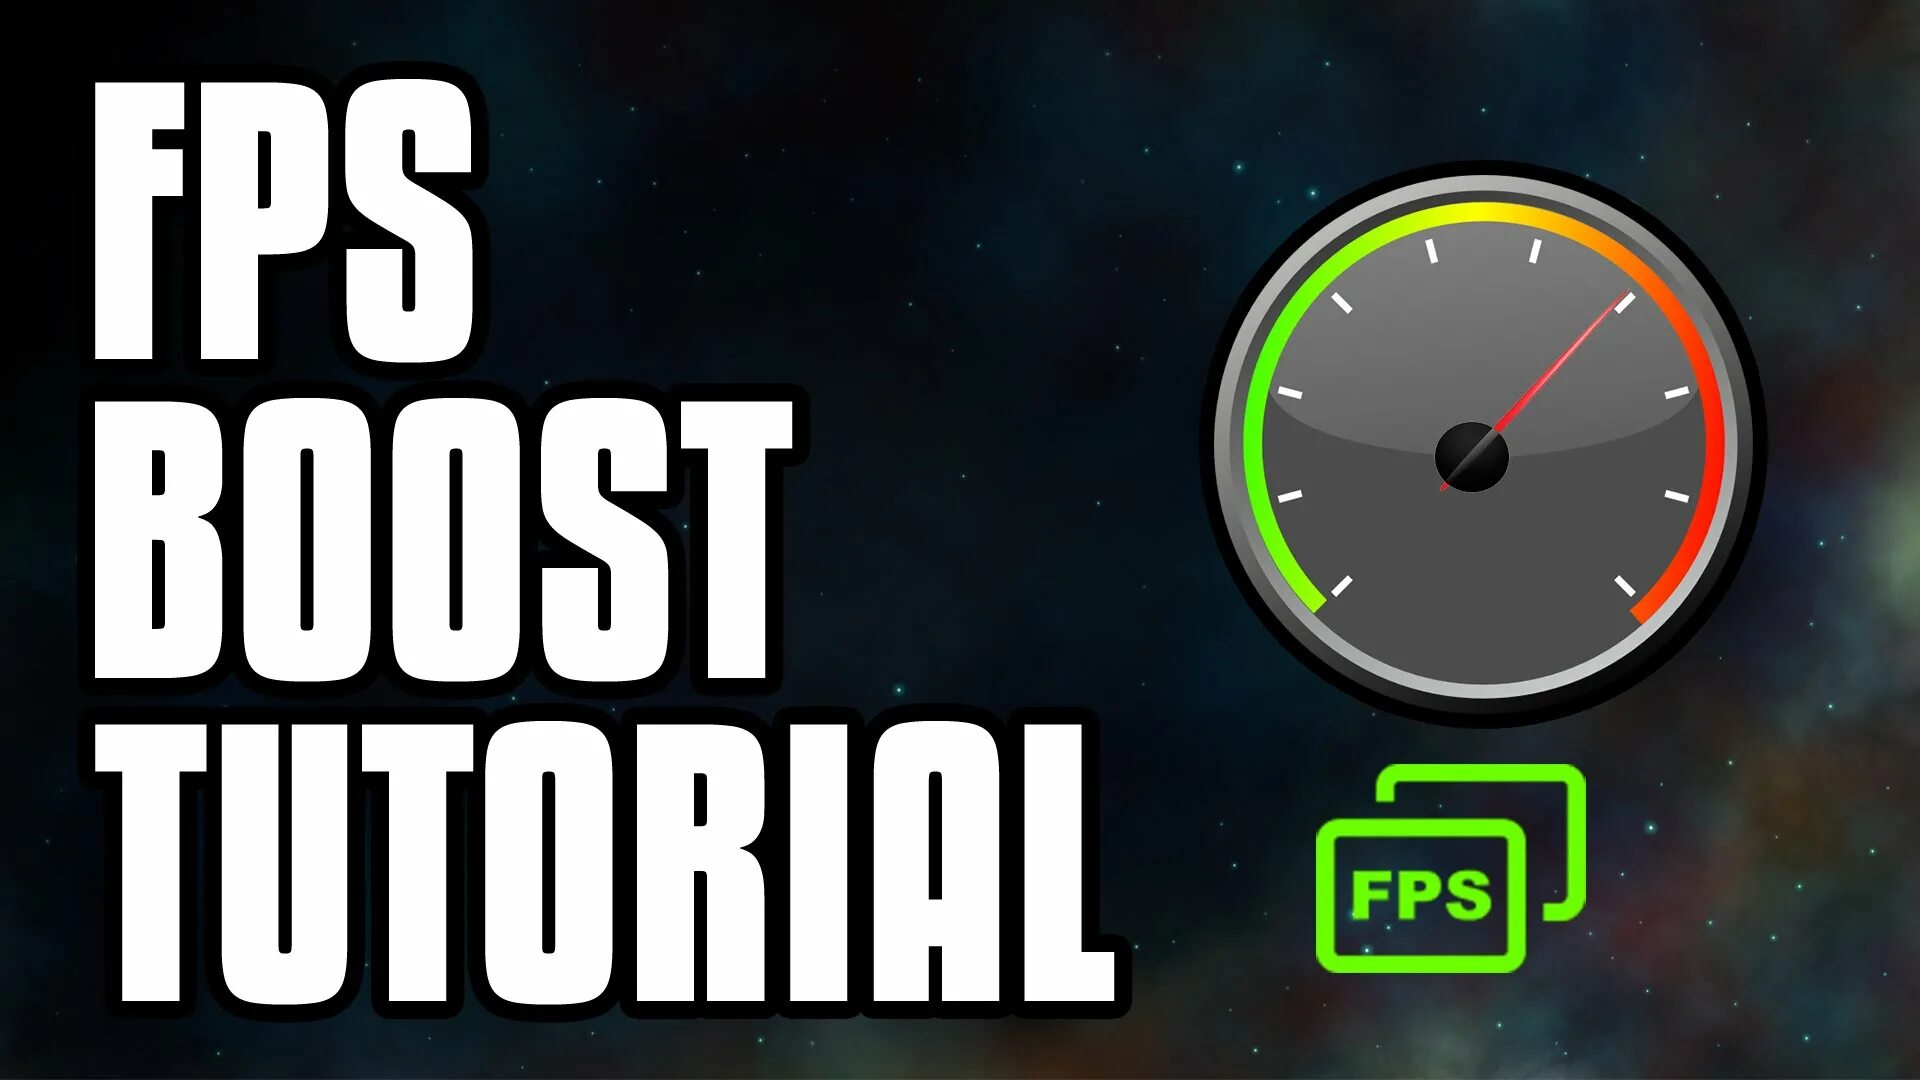 Fps Boost. ФПС. ФПС картинка. ФПС Booster. Клиенты буст фпс